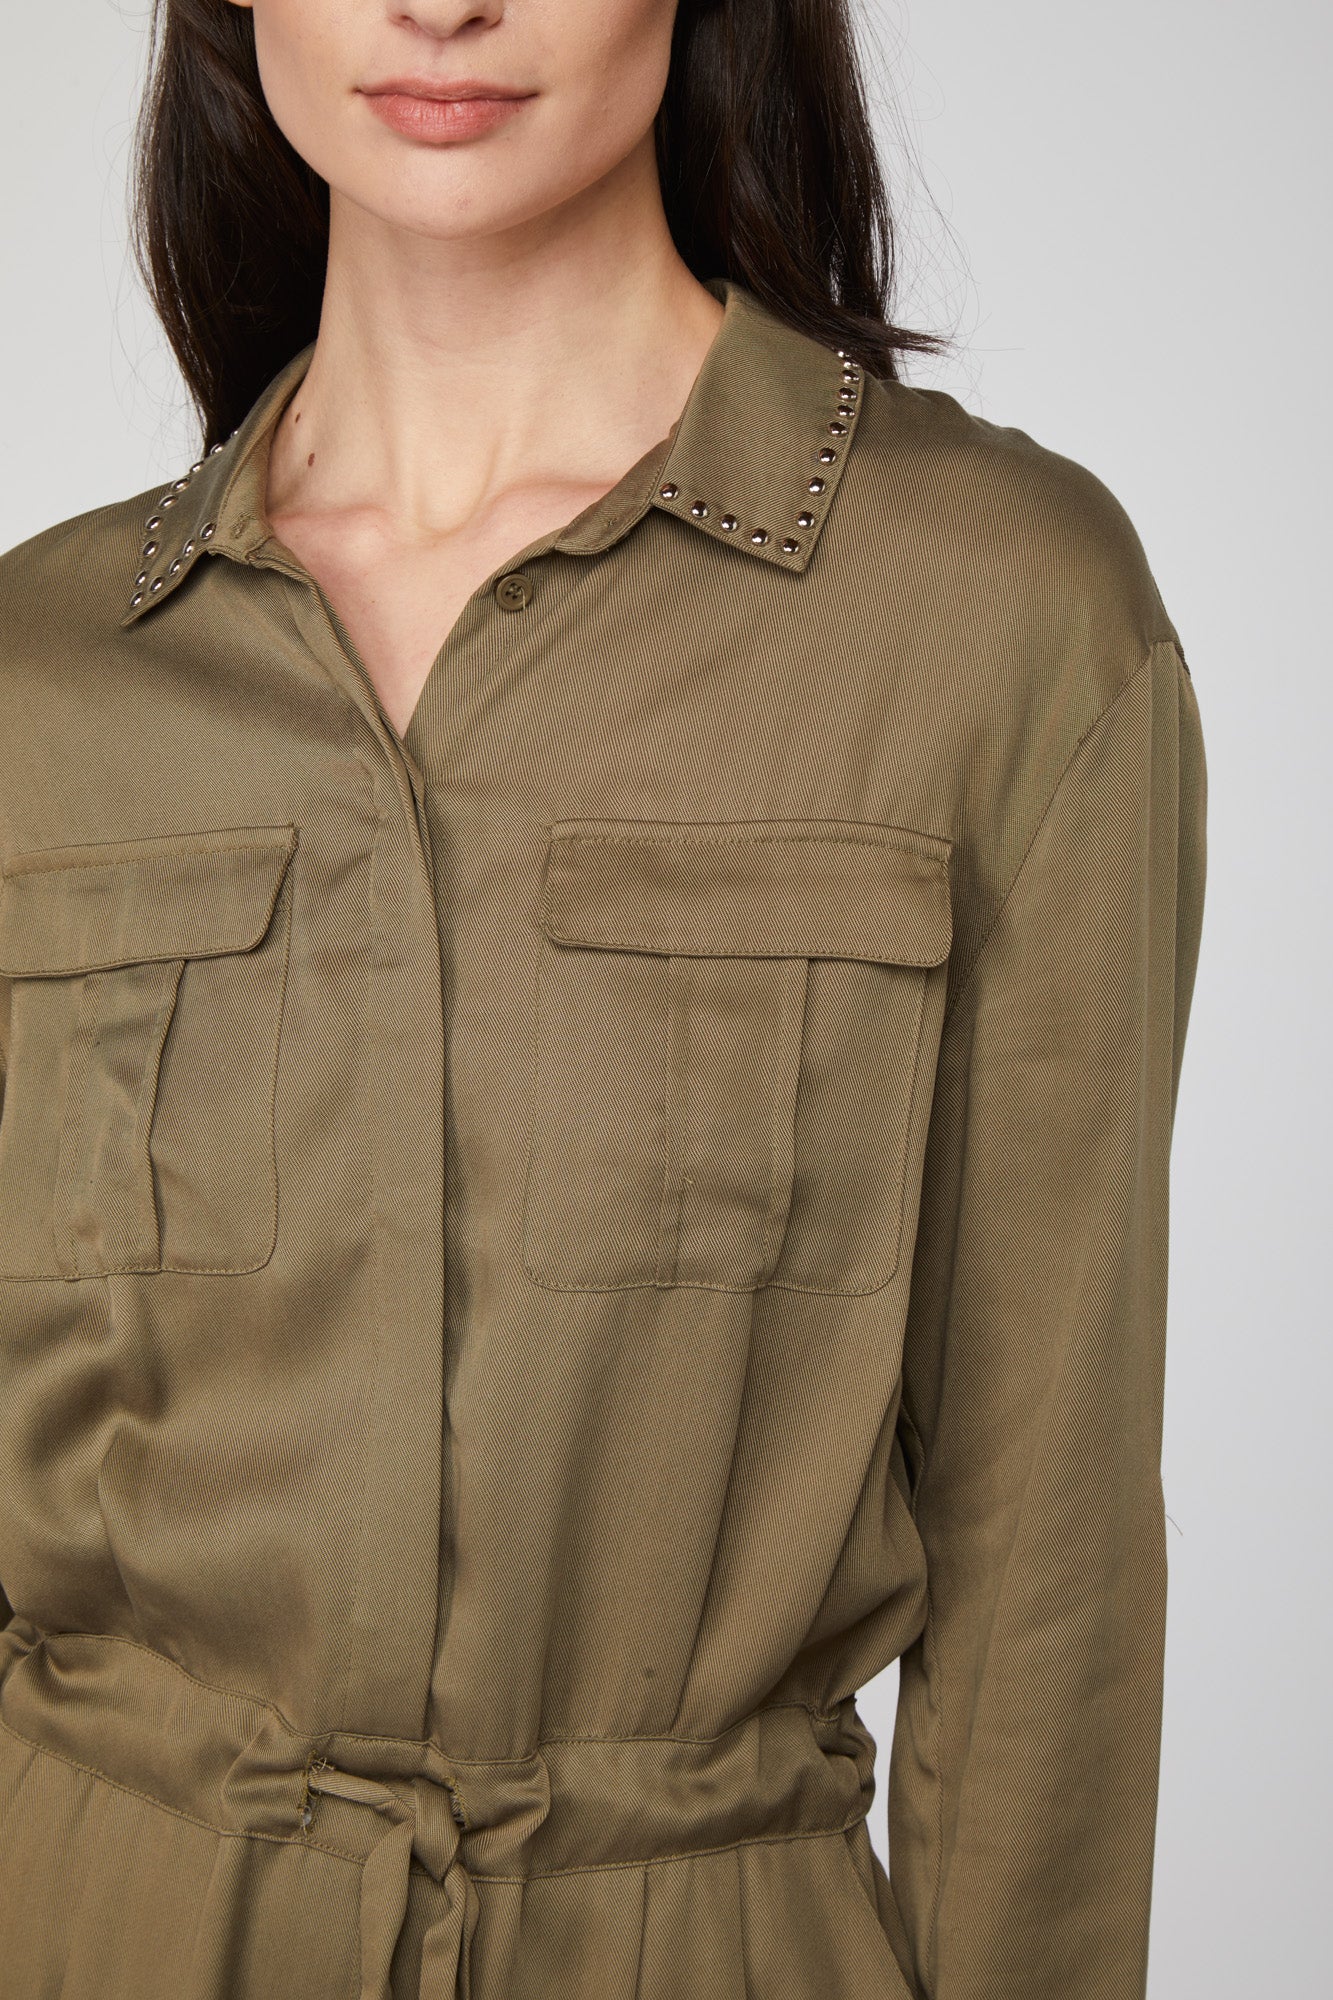 TWINSET Military Green Suit